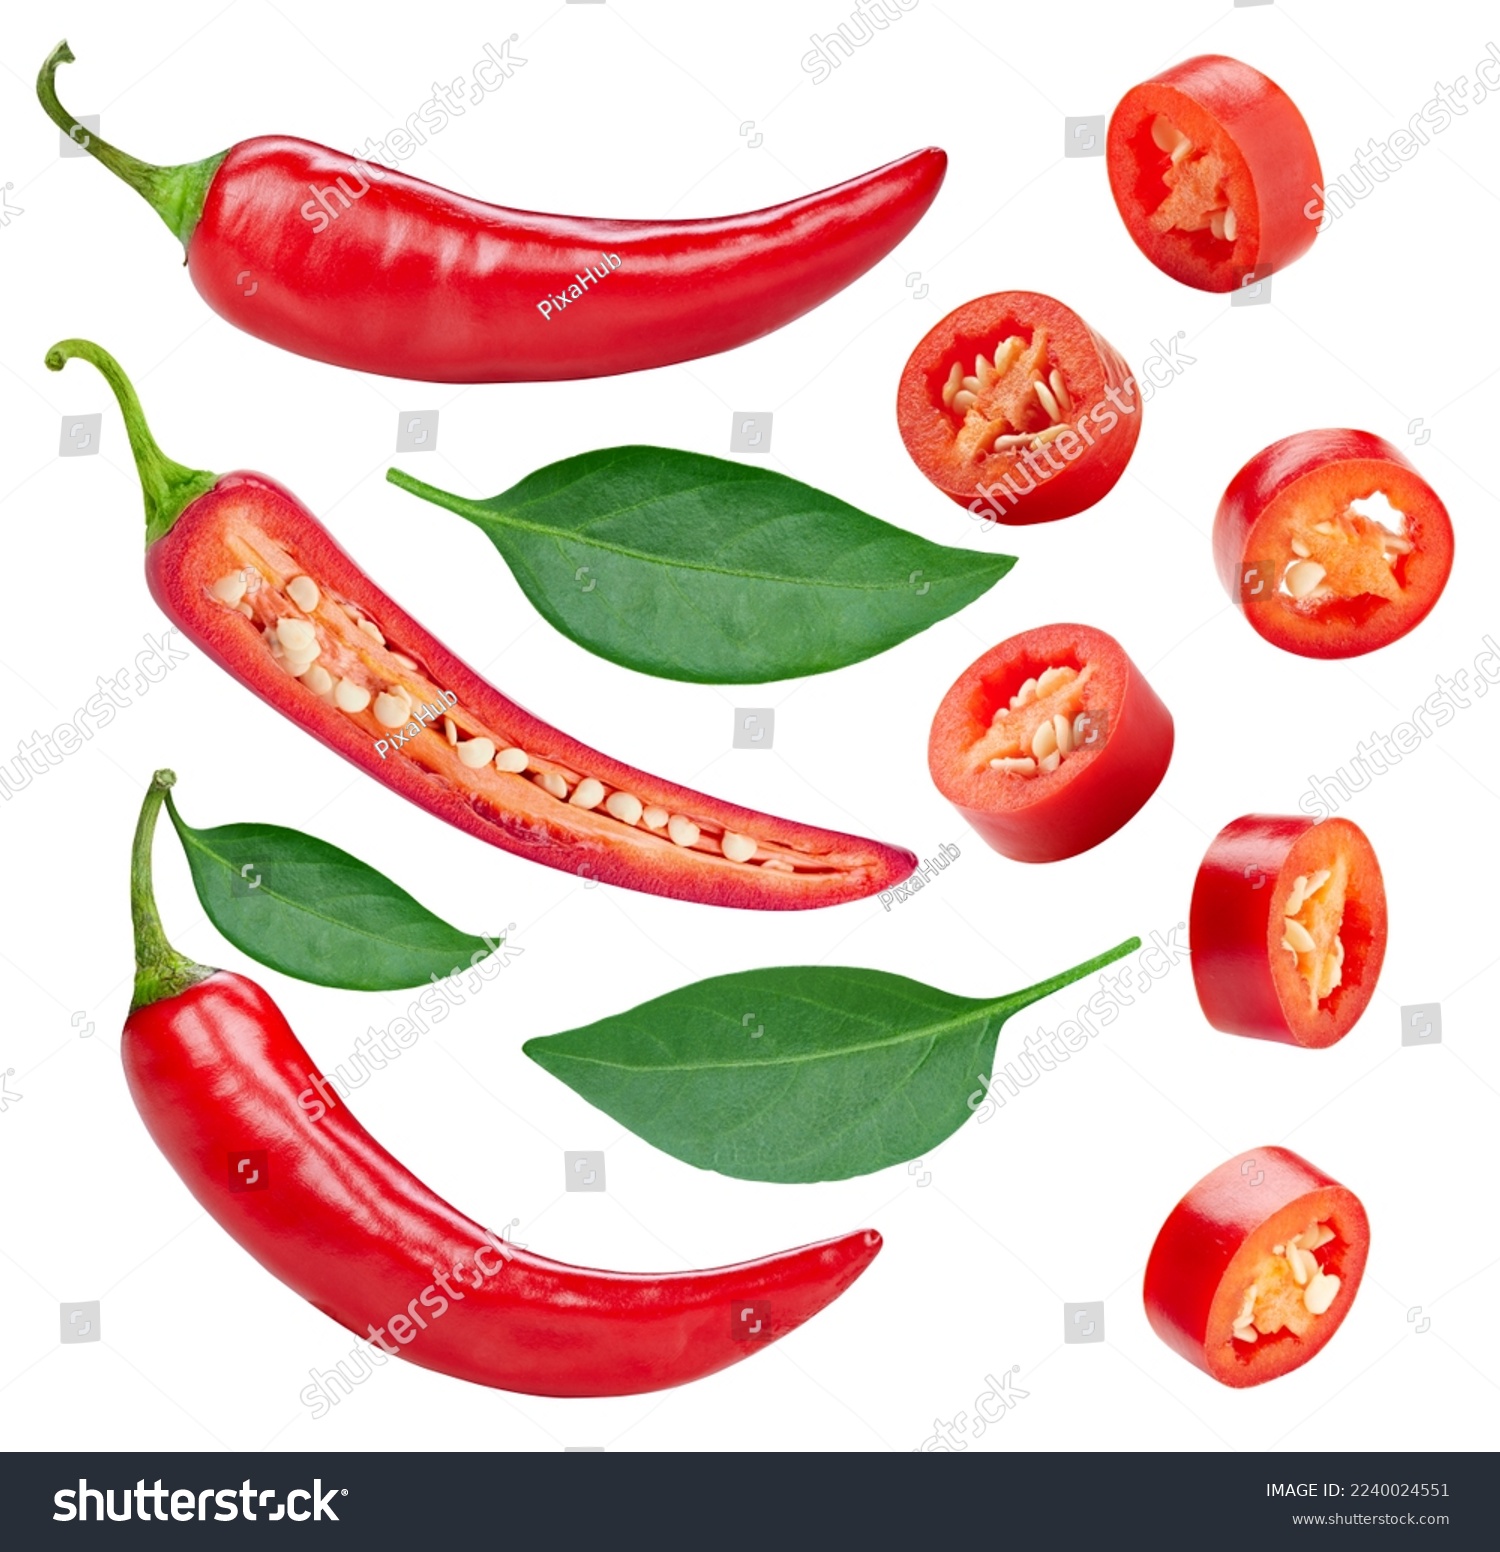 Red hot chili pepper. Fresh organic chili pepper with leaves isolated on white background. Chili pepper with clipping path #2240024551